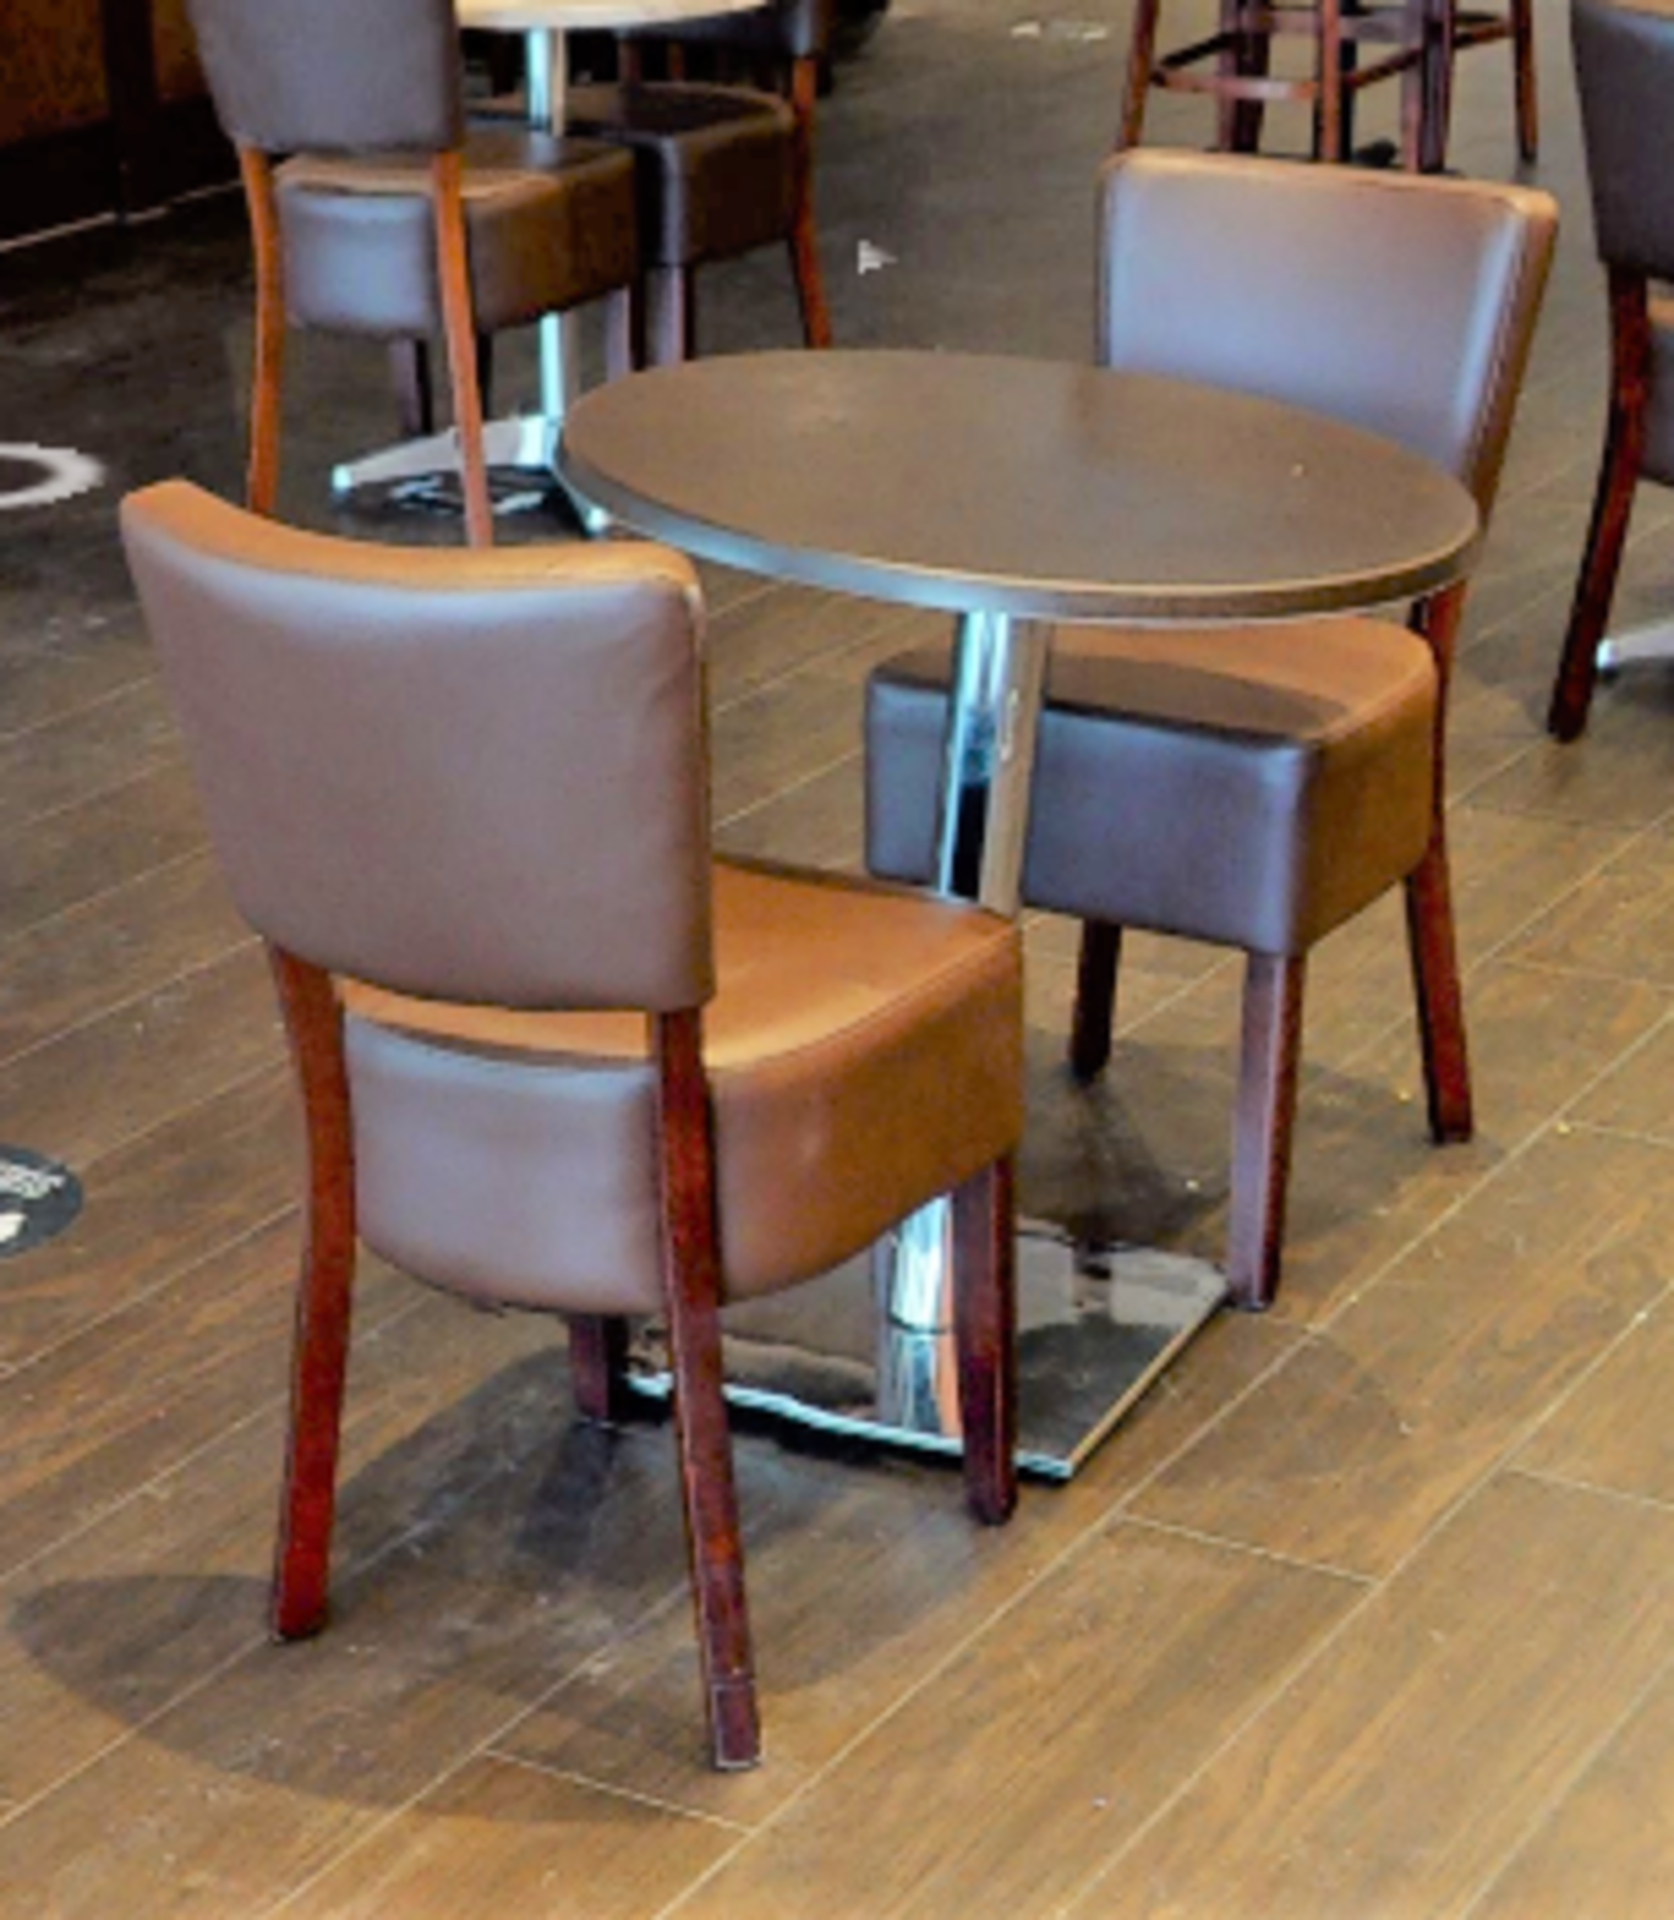 6 x Restaurant Chairs With Brown Leather Seat Pads and Padded Backrests - CL701 - Location: Ashton - Image 3 of 9